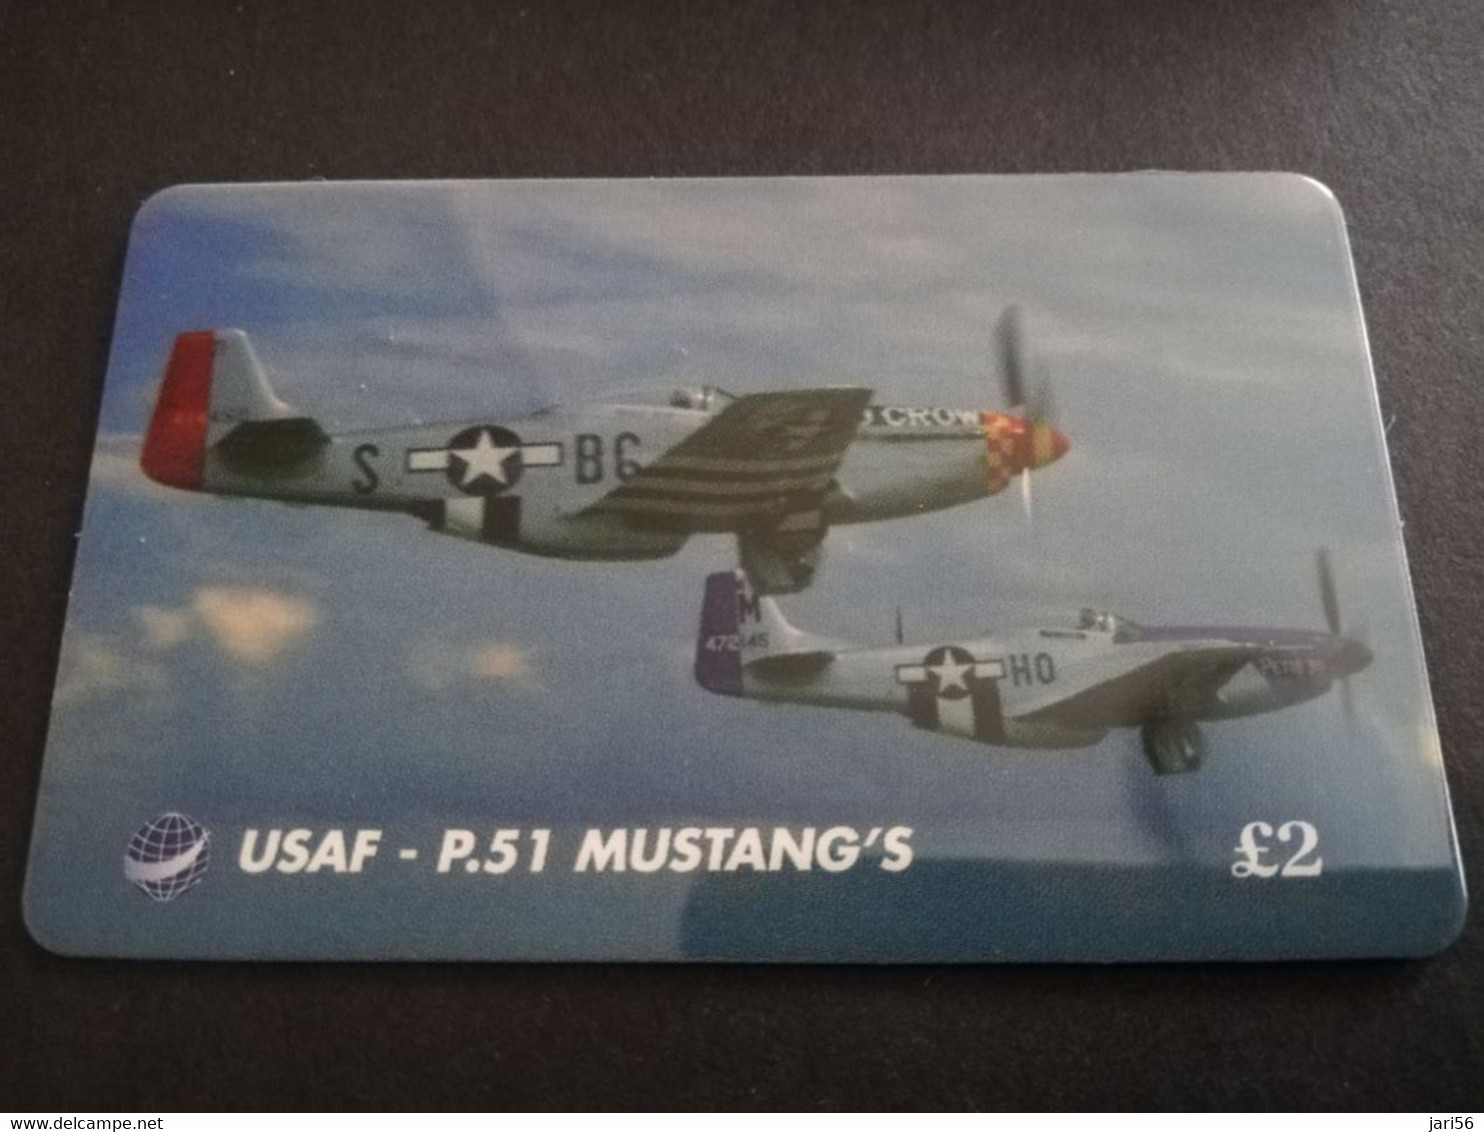 GREAT BRITAIN   2 POUND  AIR PLANES    USAF-P.51 MUSTANG'S   PREPAID CARD      **5447** - [10] Colecciones